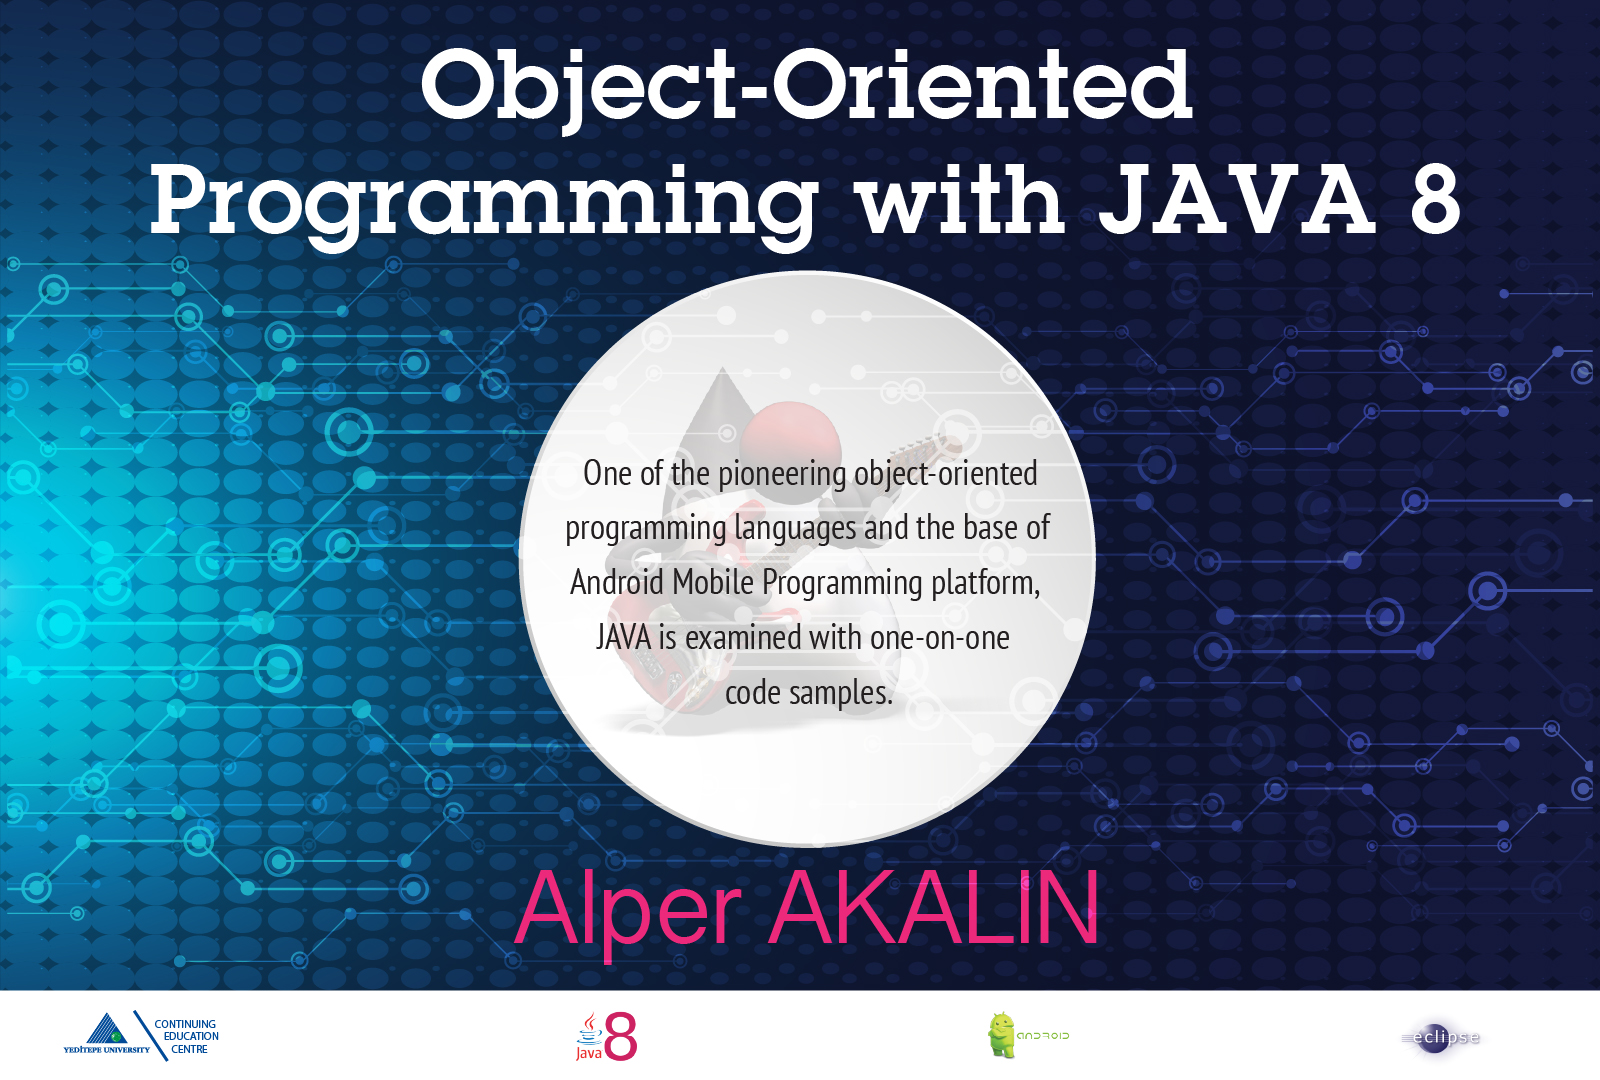 Object - Oriented Programming with JAVA 8